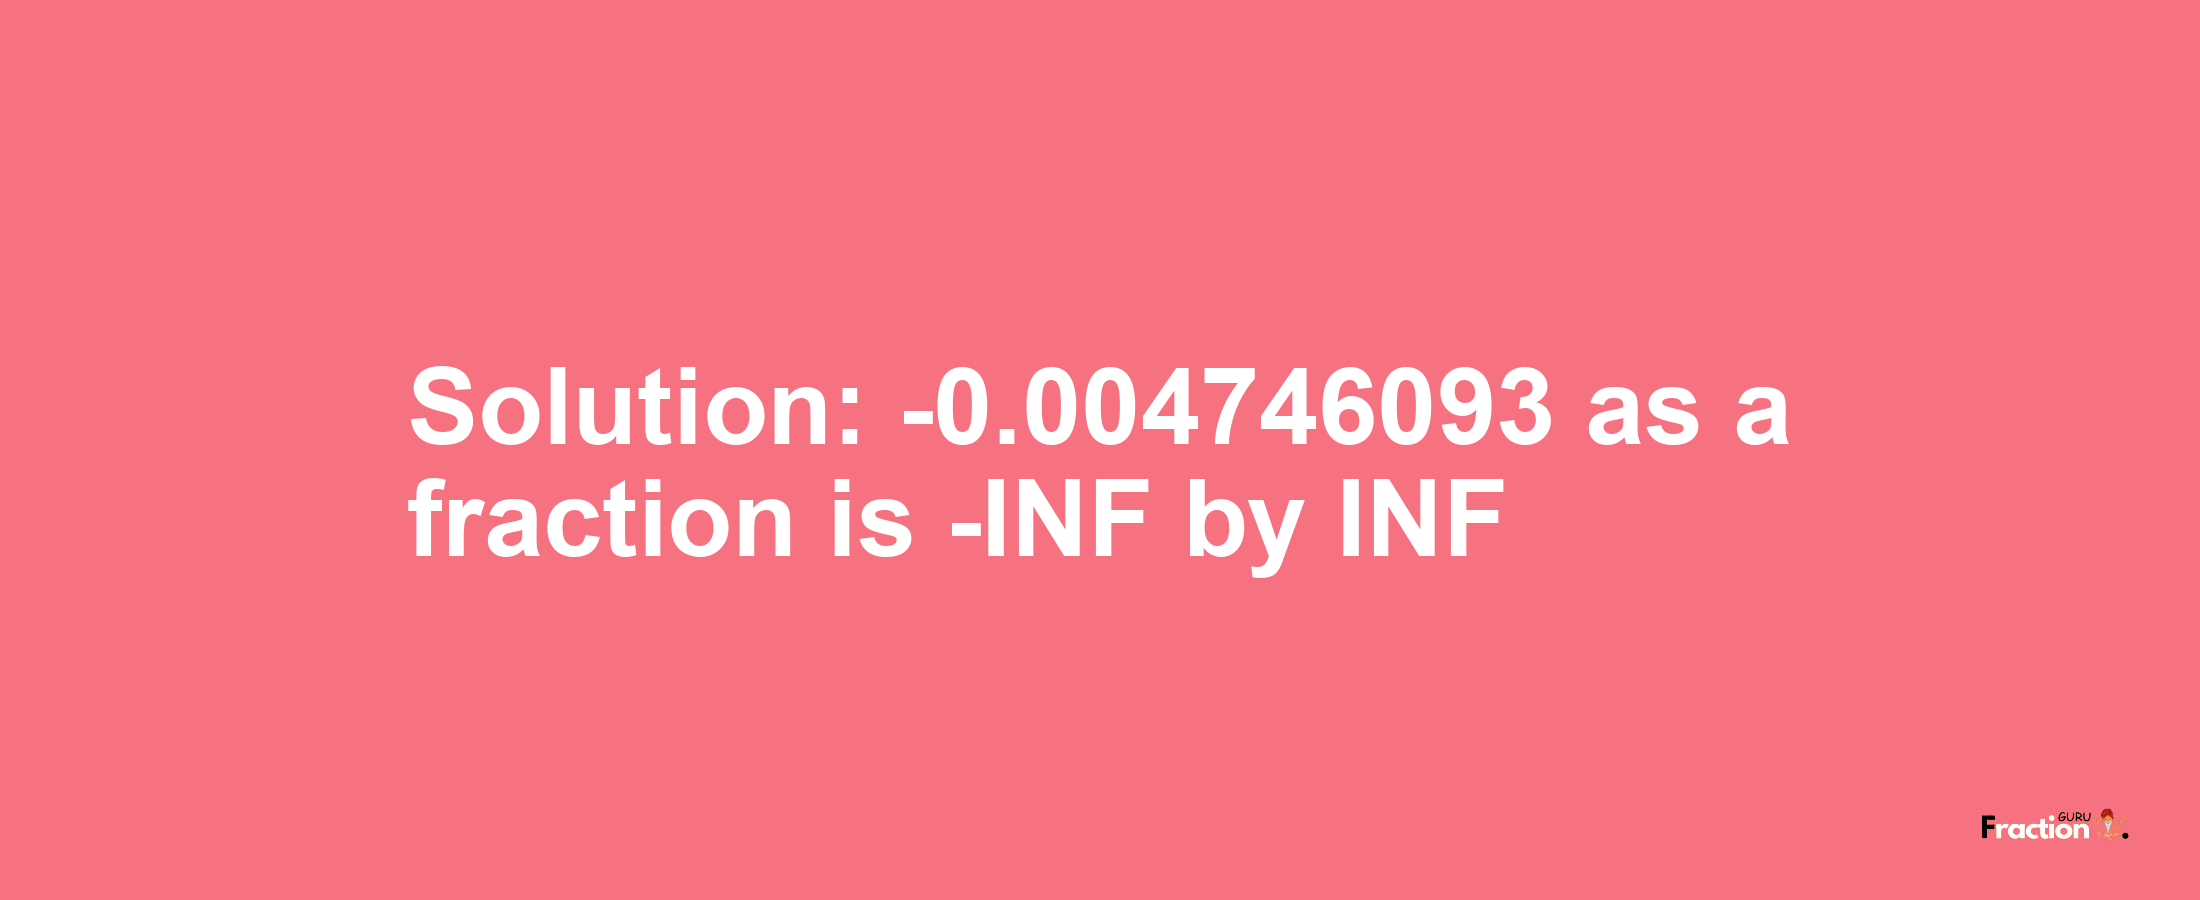 Solution:-0.004746093 as a fraction is -INF/INF